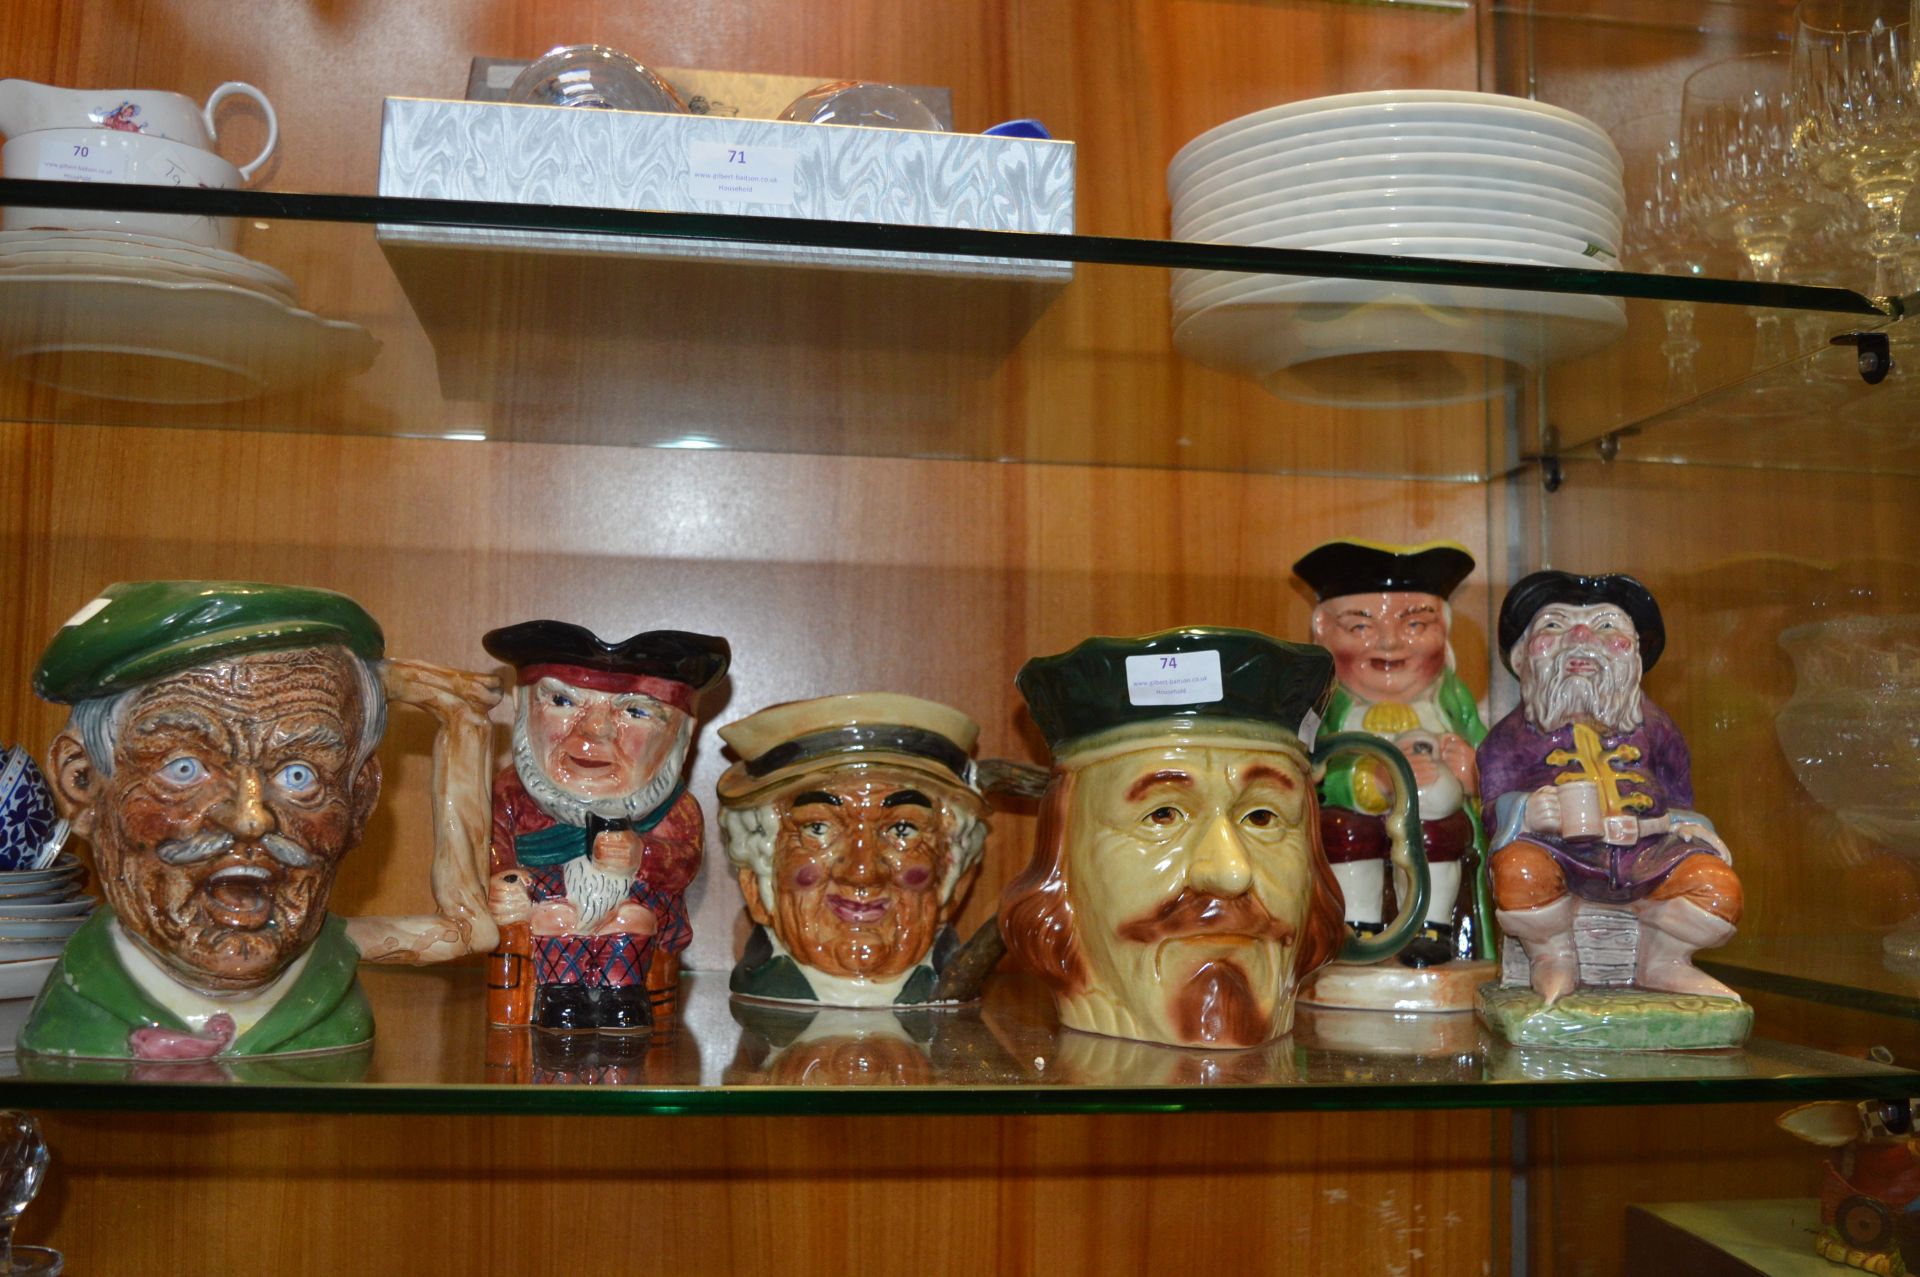 Six Large Toby Jugs and Character Jugs